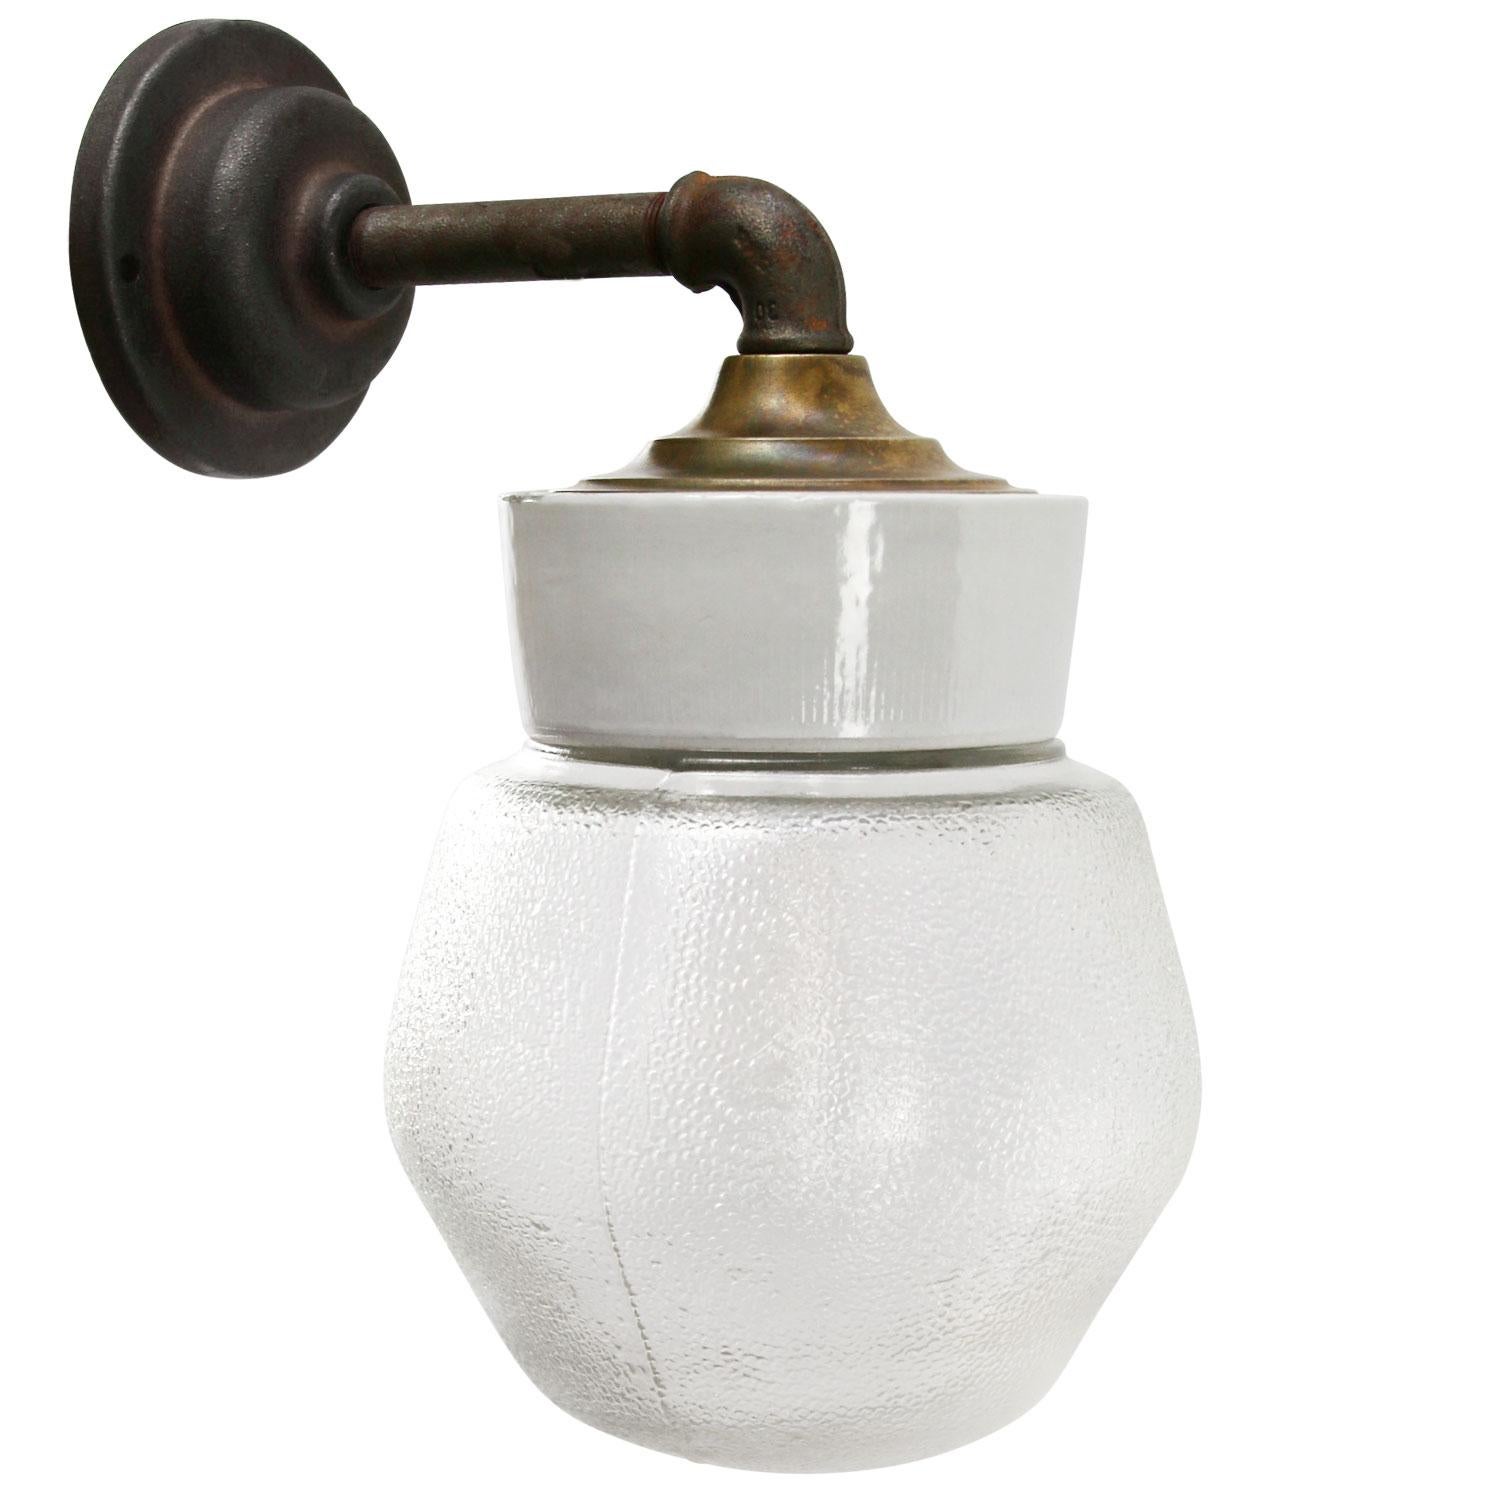 Porcelain Industrial wall lamp.
White porcelain, brass and cast iron
Frosted glass.
2 conductors, no ground.

Measures: Diameter cast iron wall piece 10 cm. 2 holes to secure.

Weight: 2.50 kg / 5.5 lb

Priced per individual item. All lamps